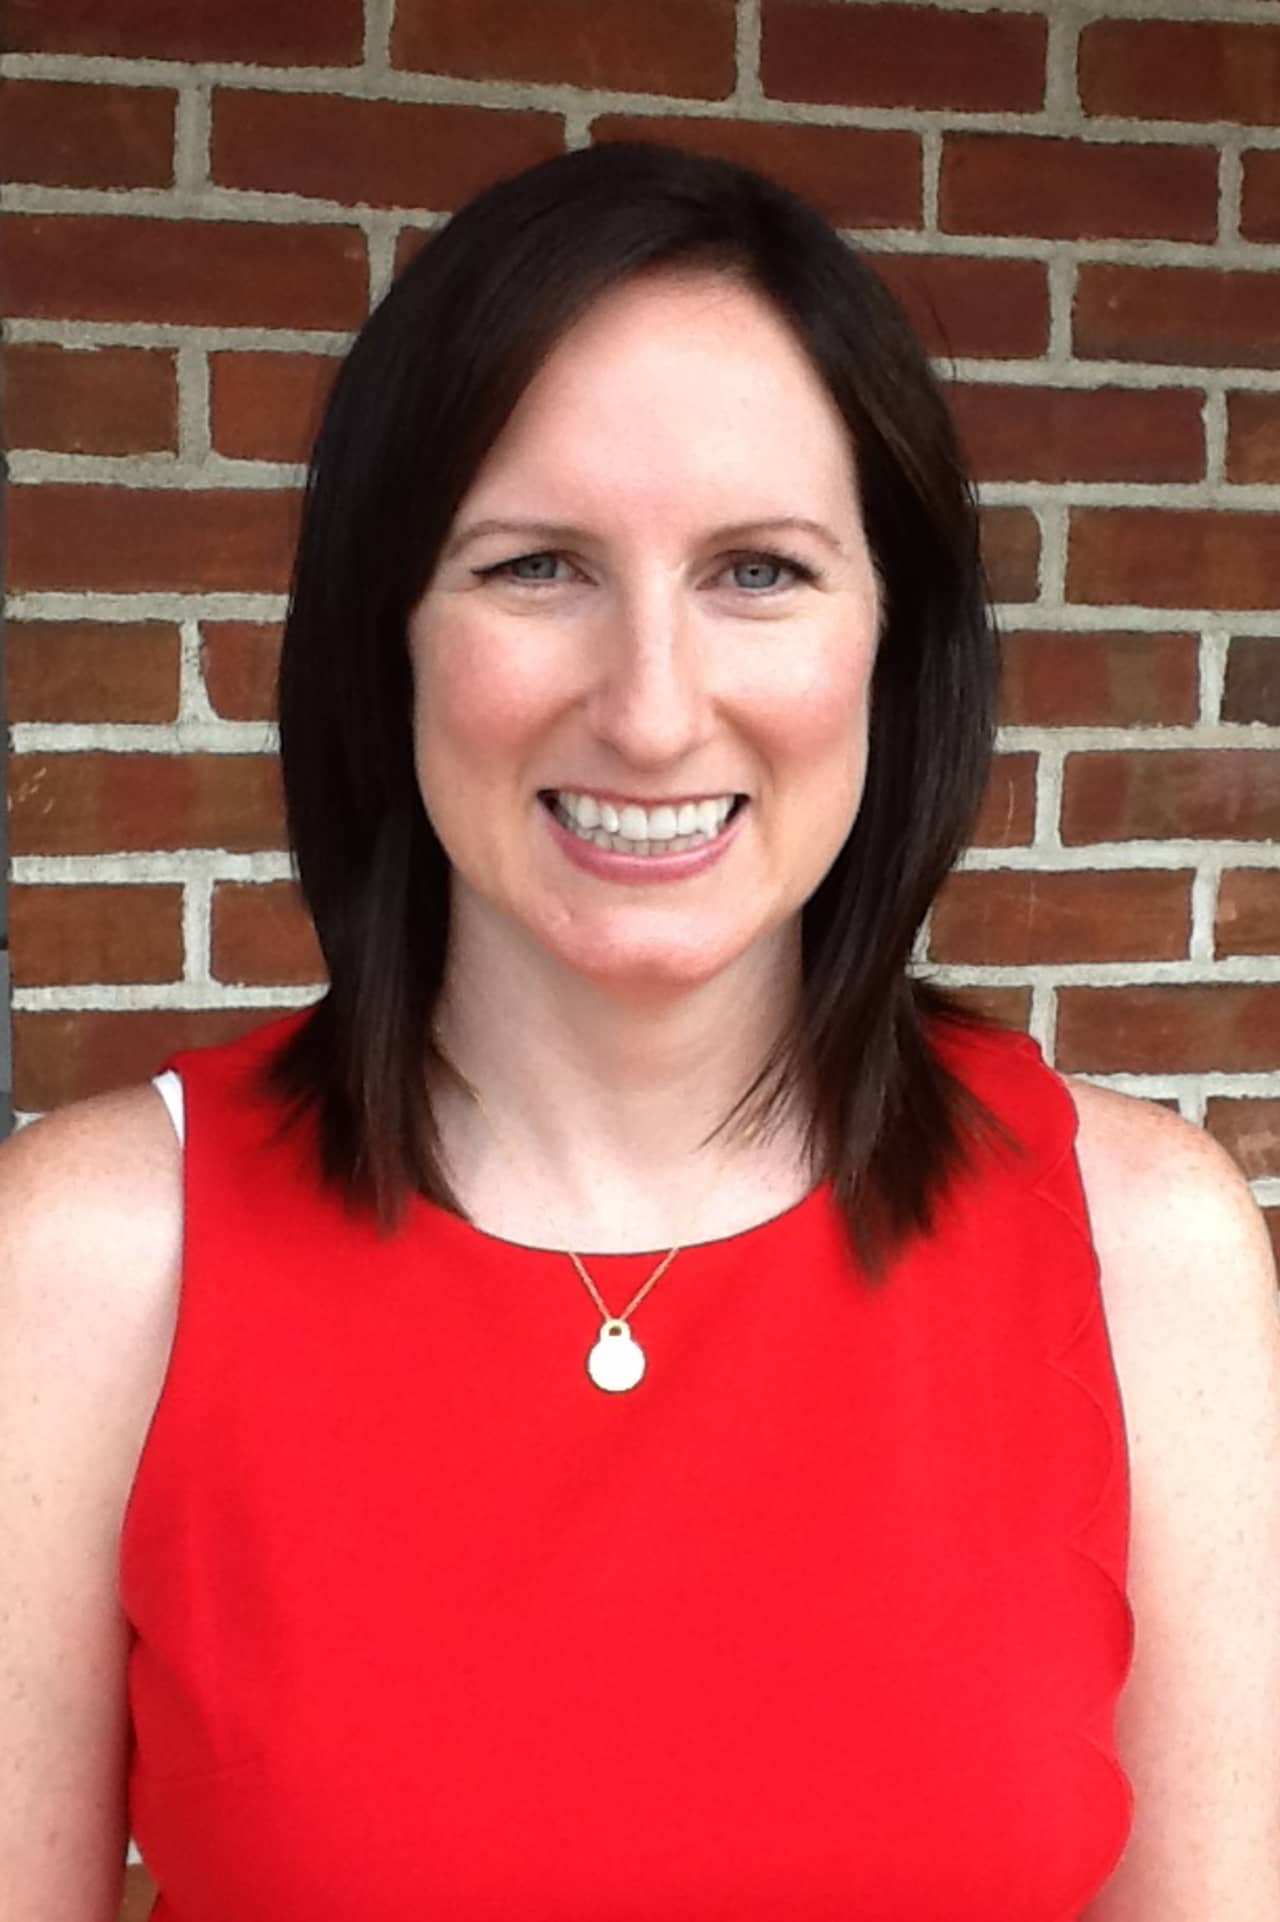 Jill Flood will be the new principal at North Street School in the Greenwich School District.